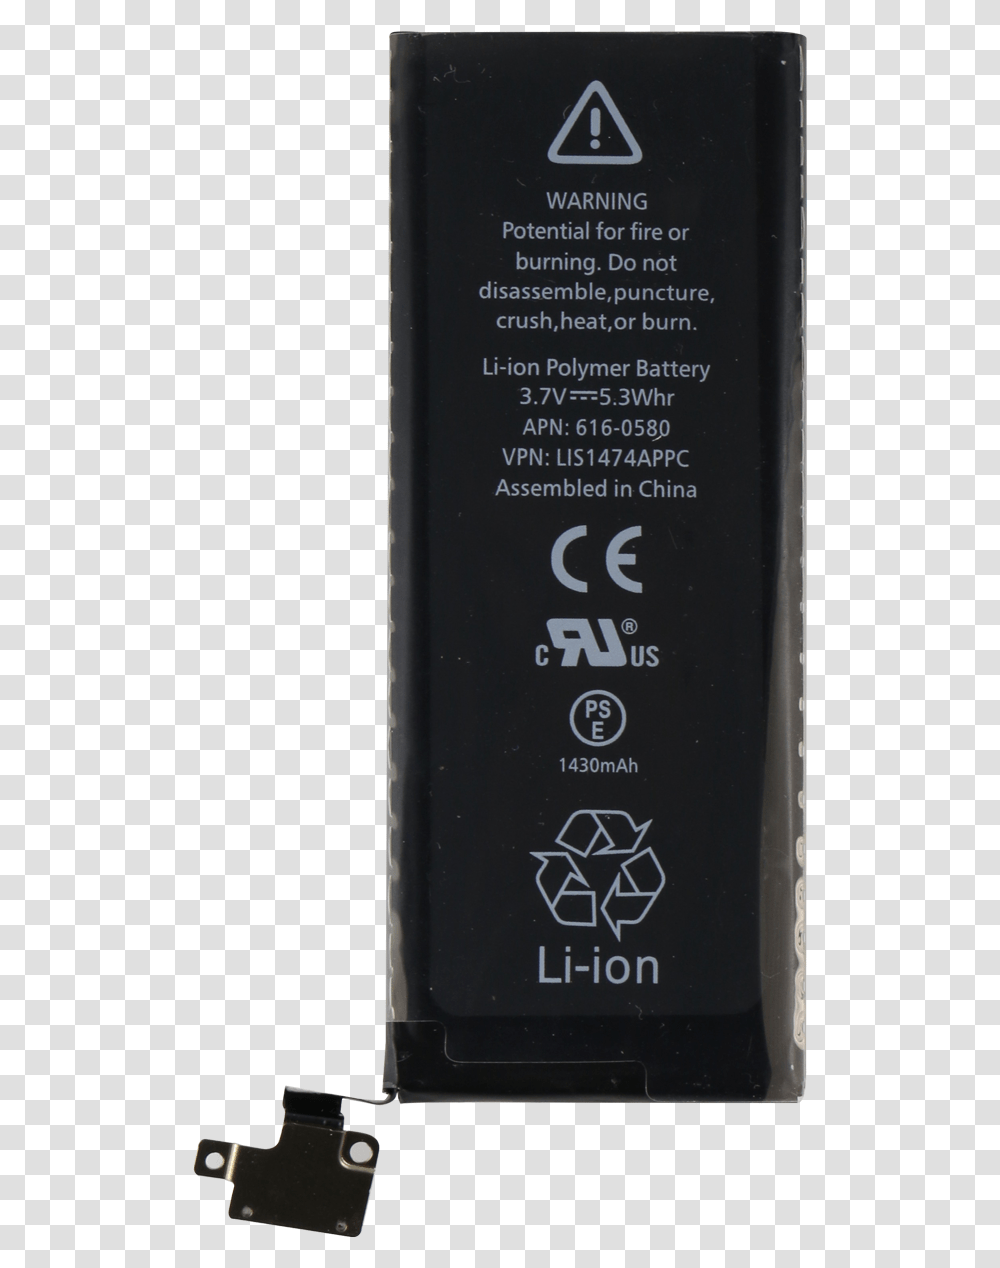 Iphone 4s Iphone 4 Battery, Book, Bottle, Mobile Phone, Electronics Transparent Png